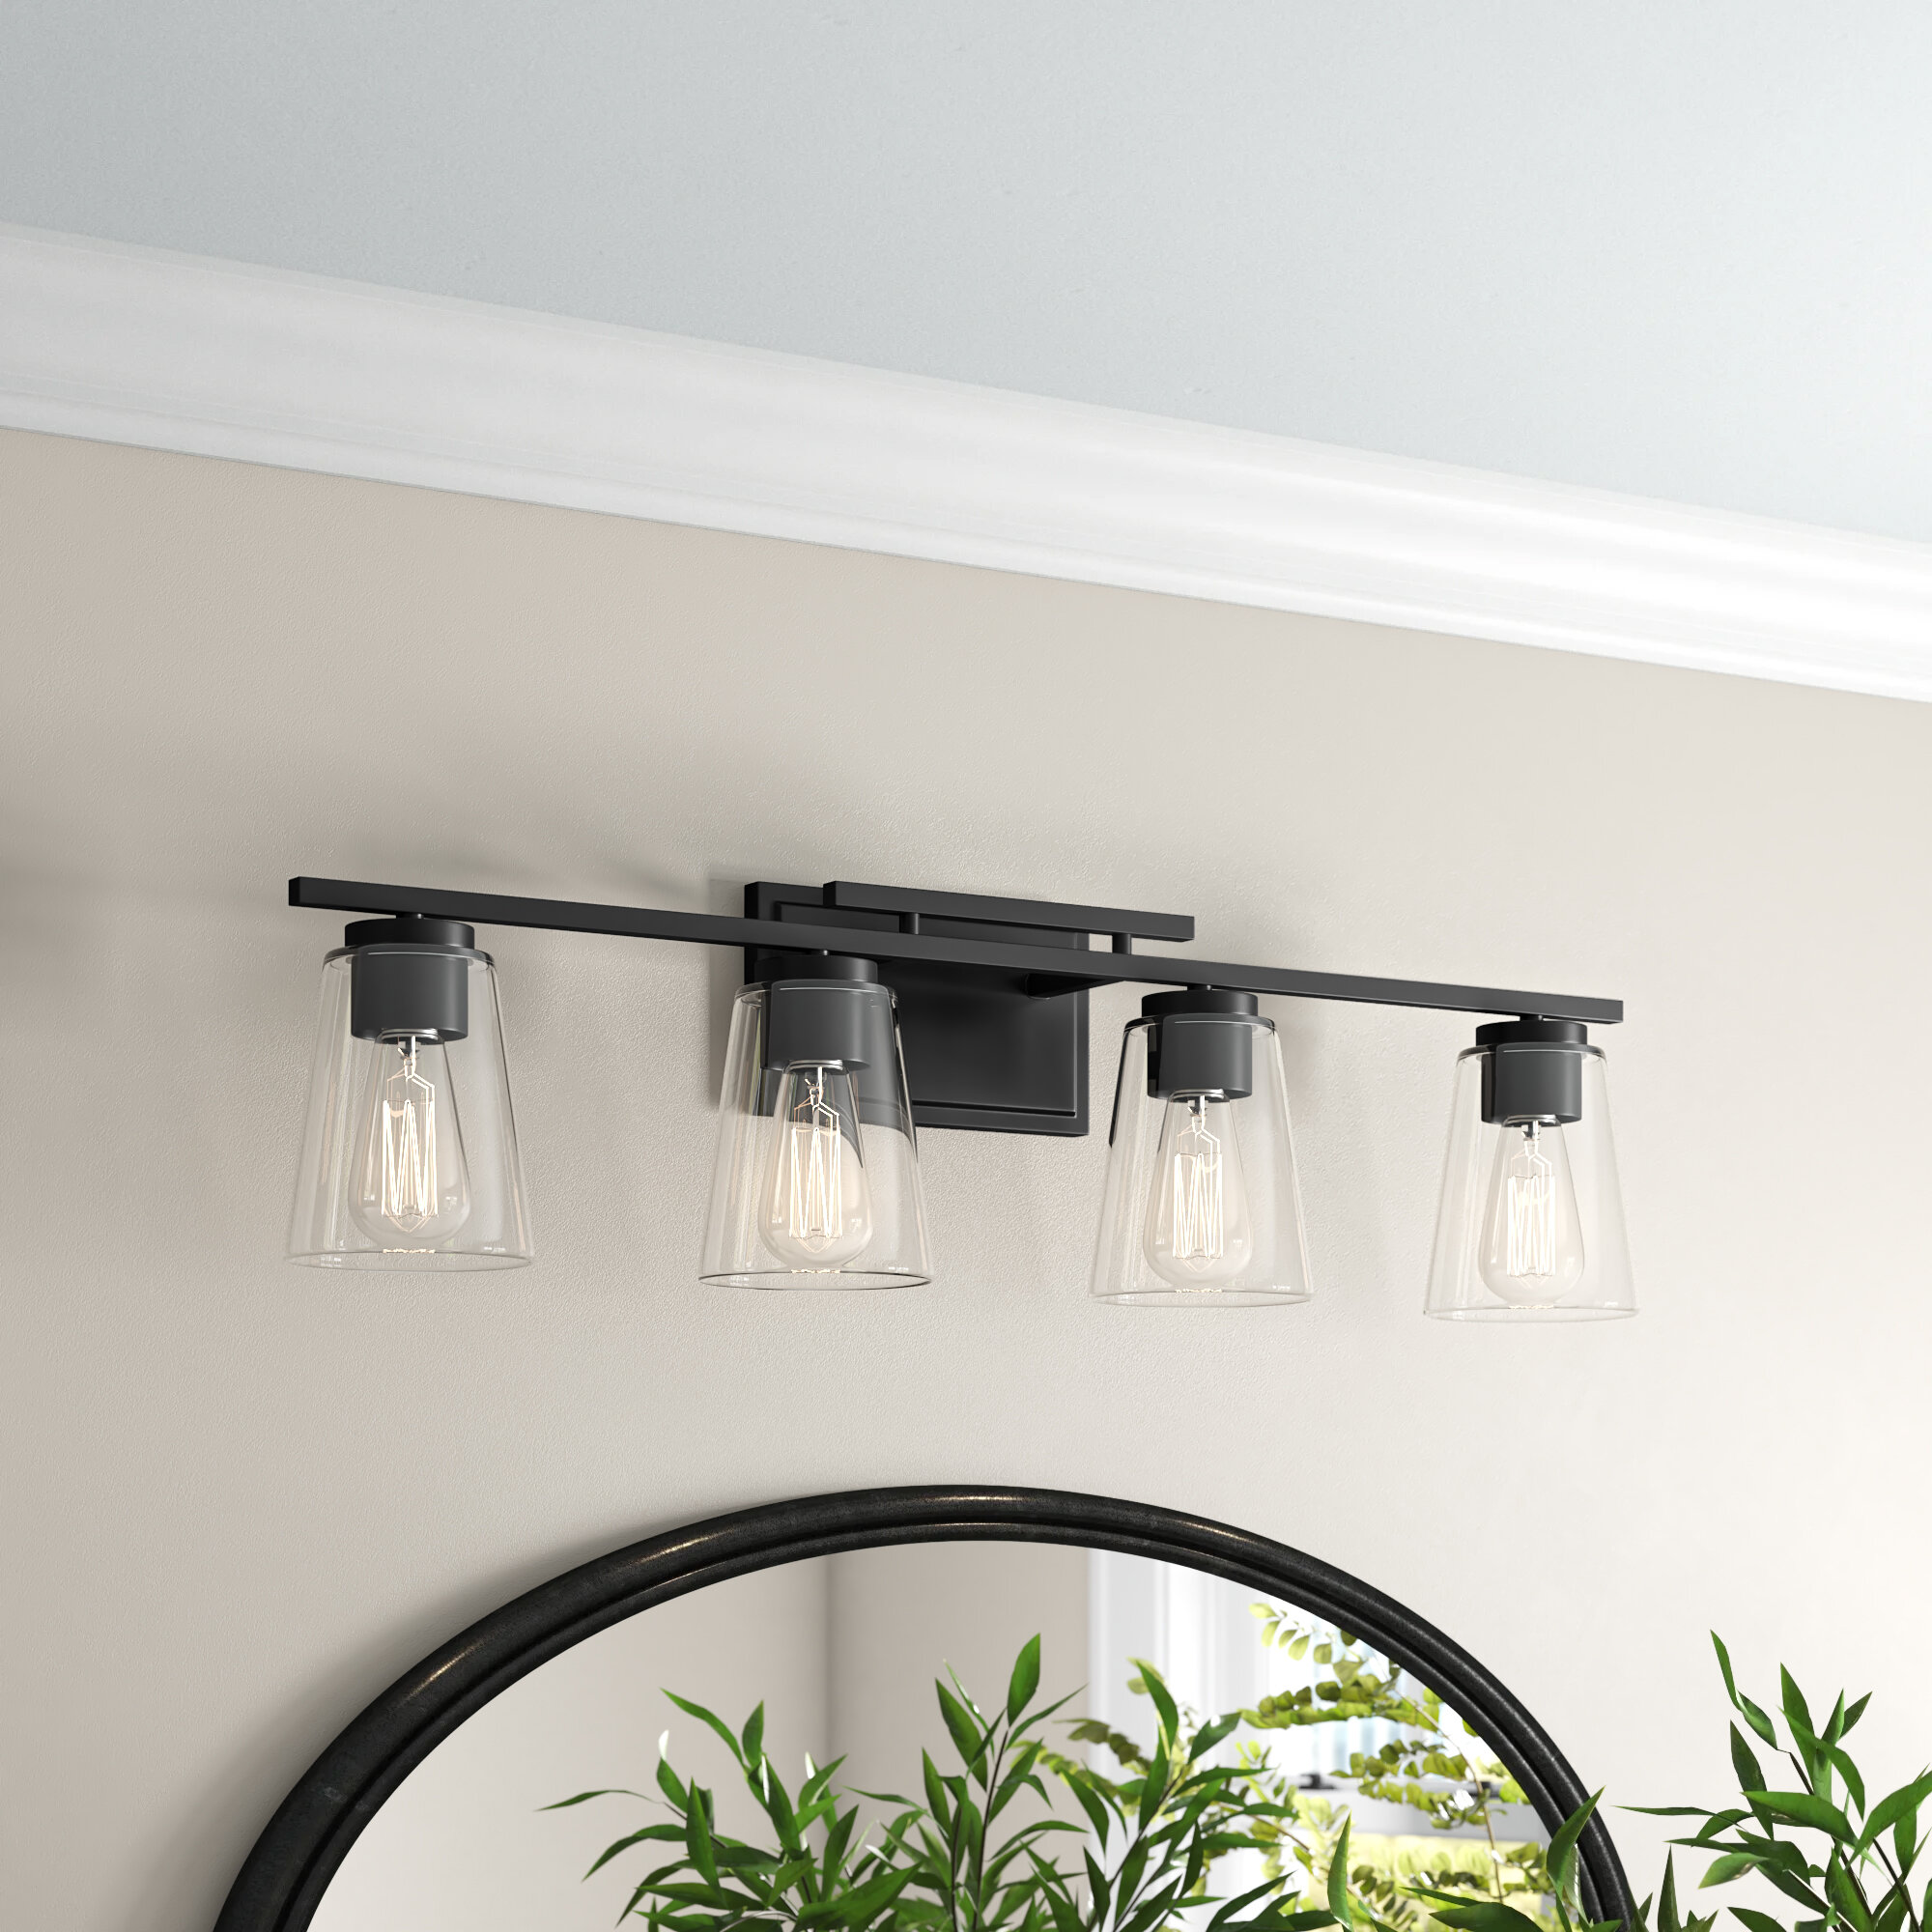 TULUCE 5 Light Wall Bathroom Vanity Light,Vintage Black Metal Wall Sconce Lighting with Clear Ribbed Glass Shades Fixtures Wall Mount Lighting for Farmhouse Bedroom Living Room 